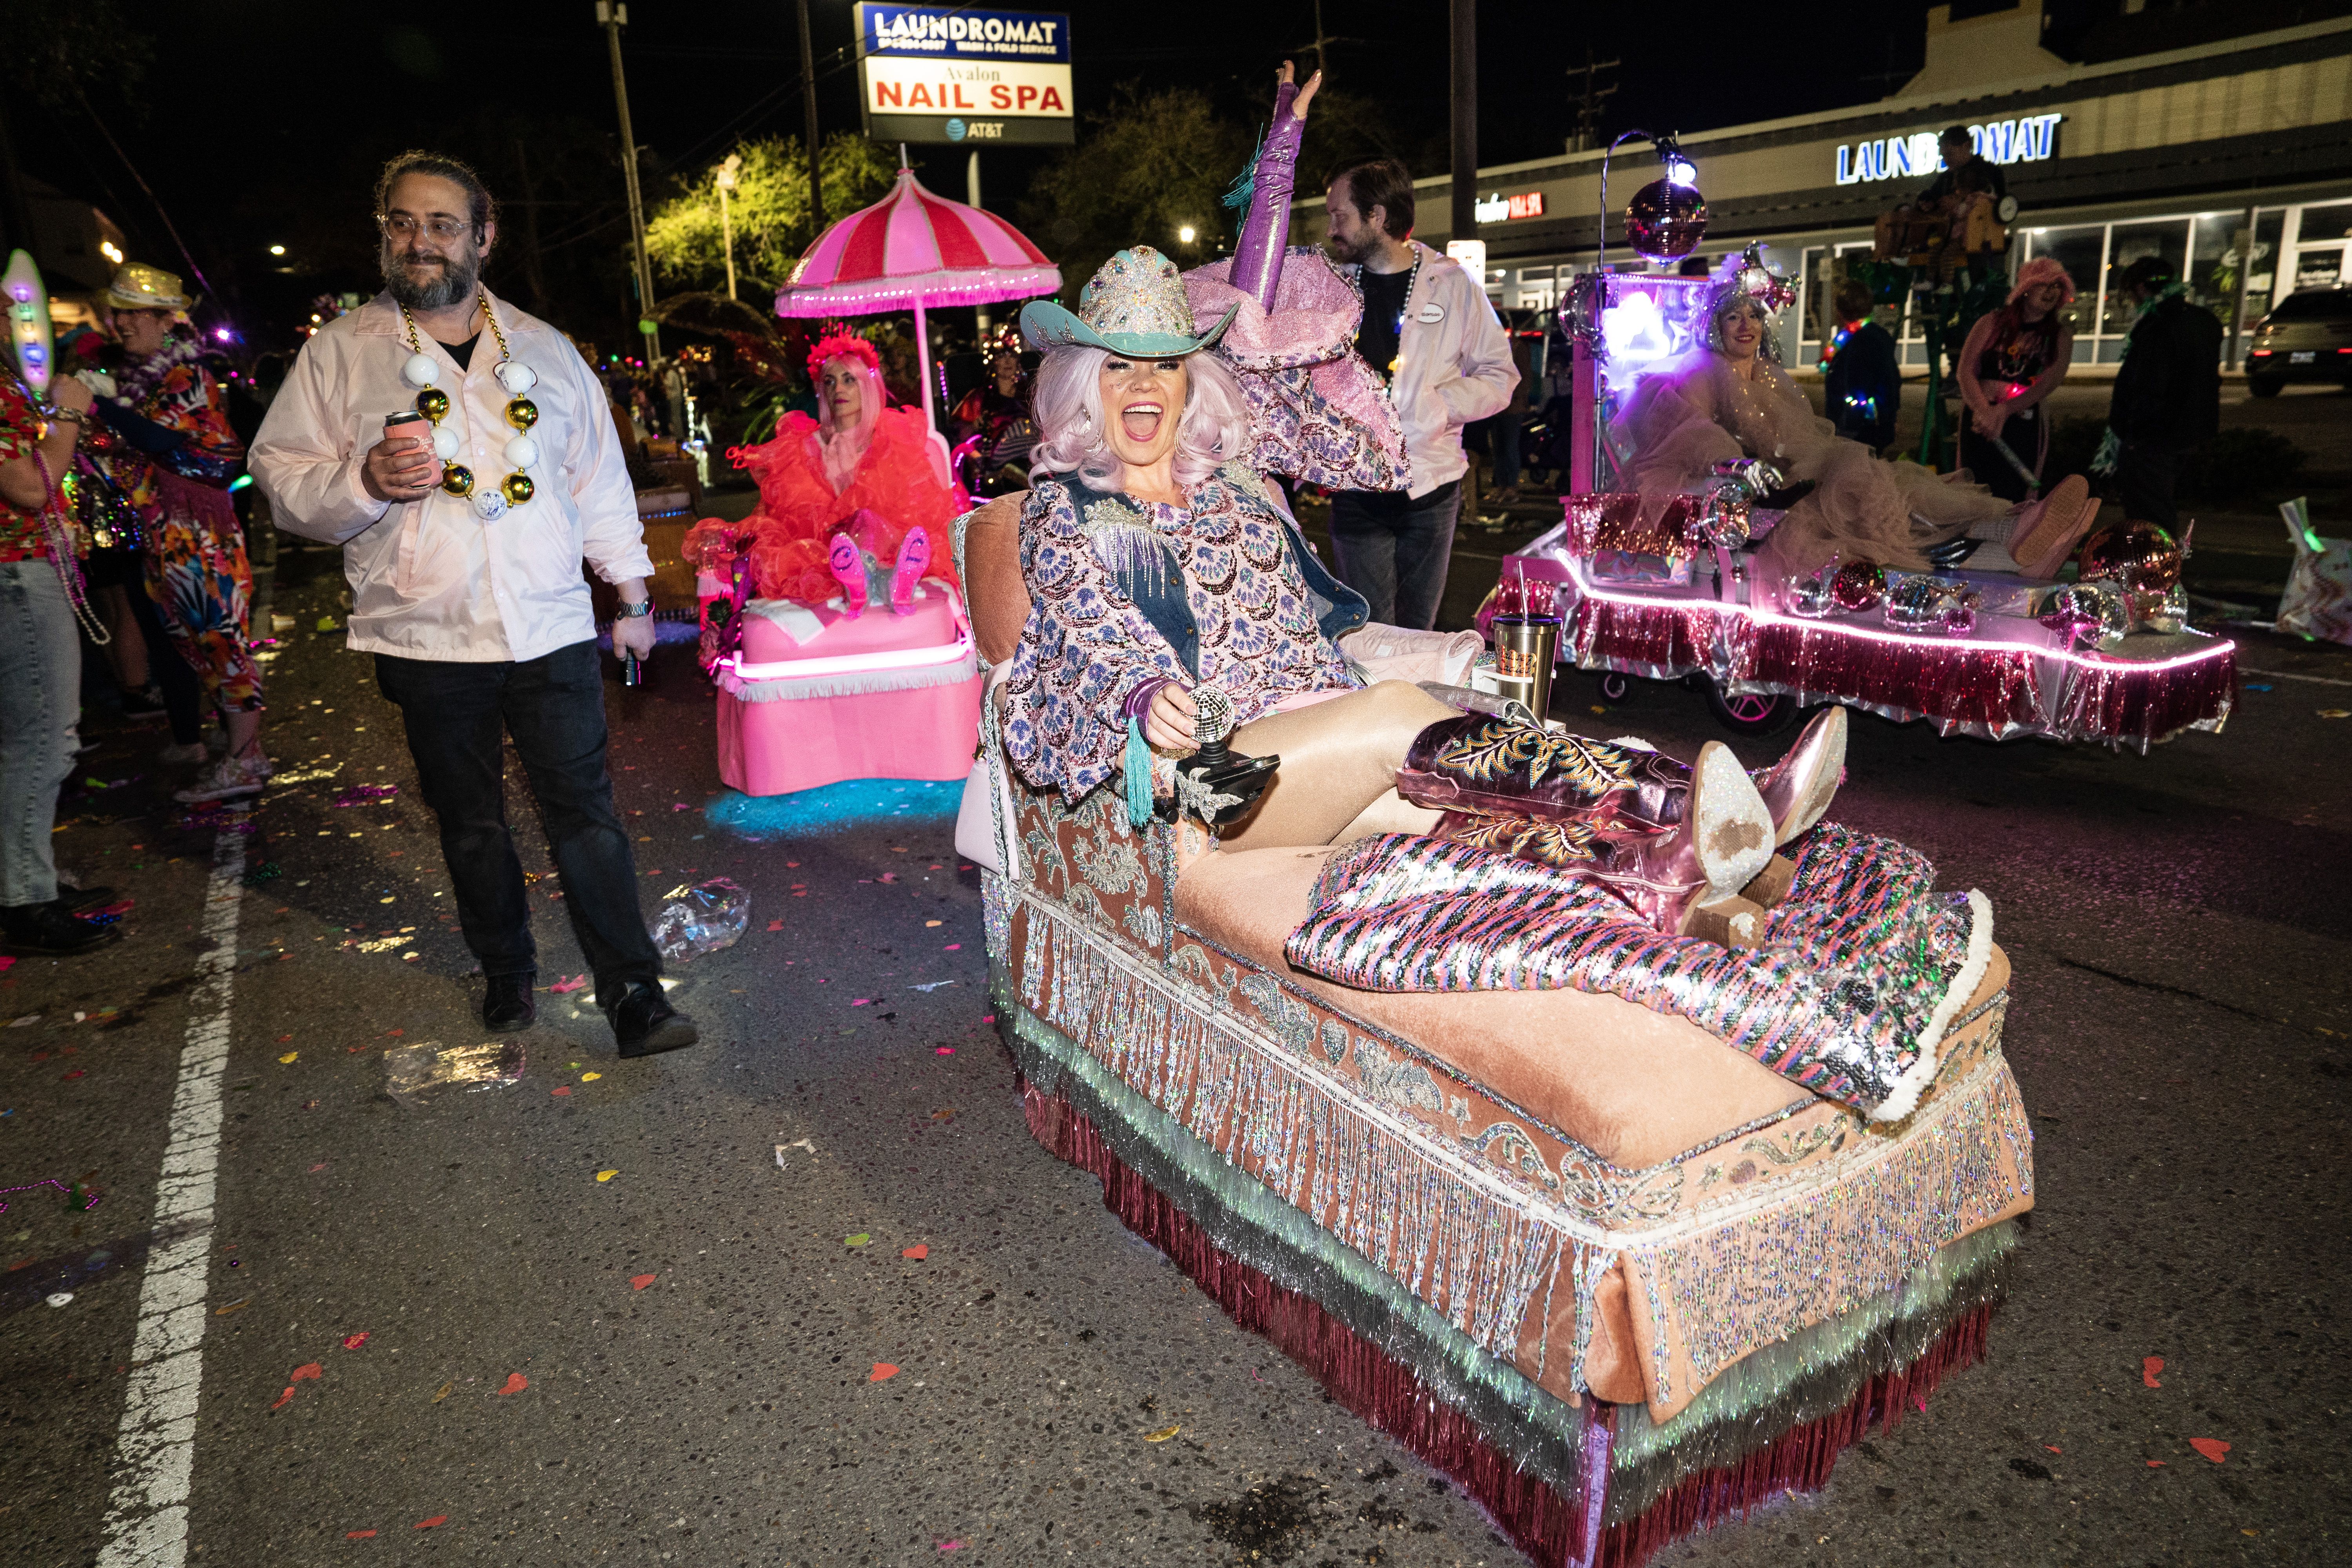 Women on decorated chaise lounges parade down the route.